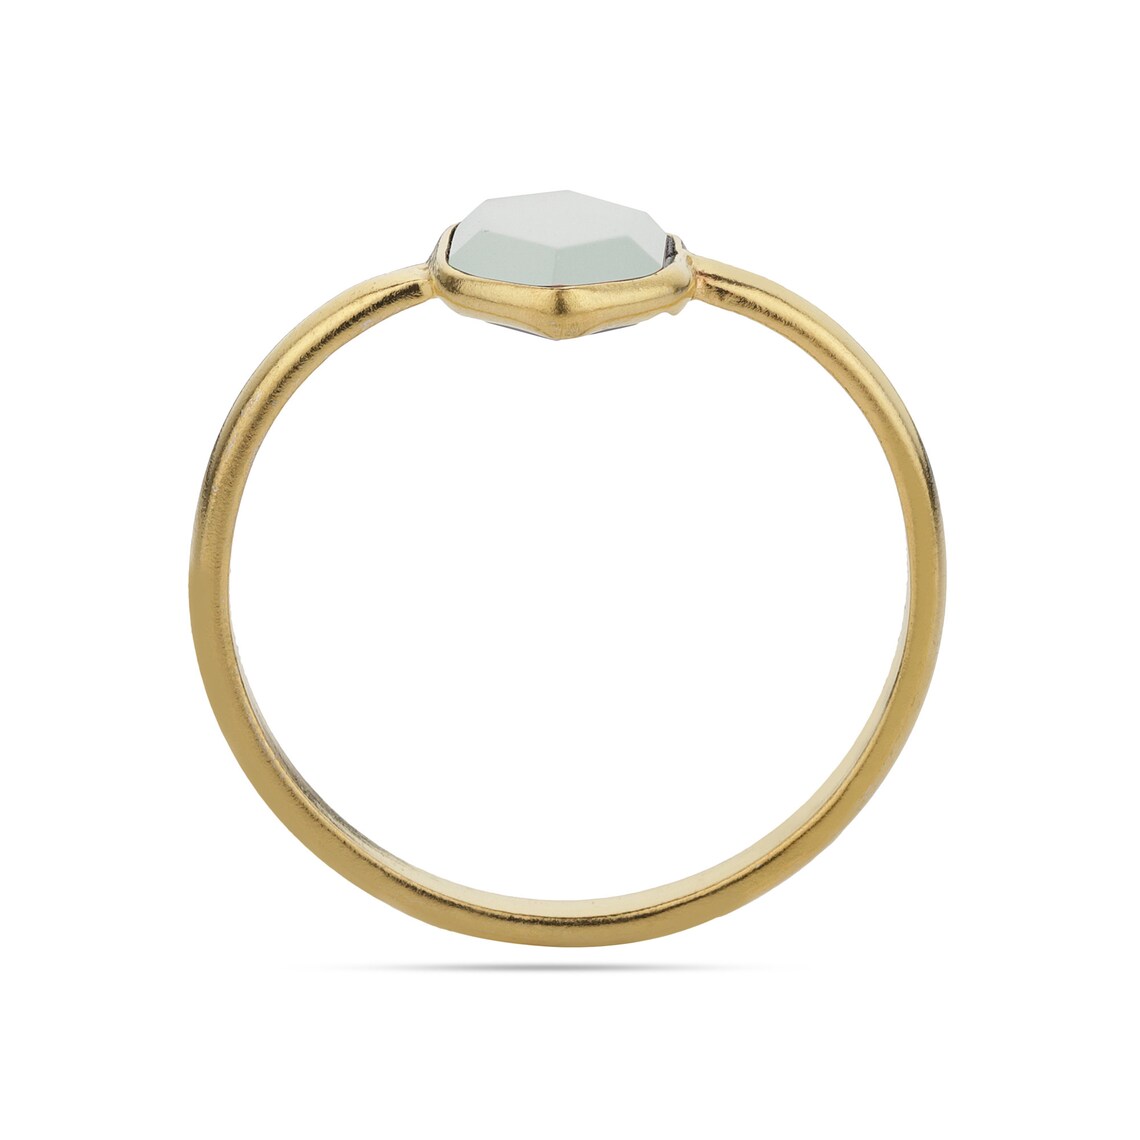 Gold Plated on 925 Sterling Silver - Aqua Chalcedony Gold Plated Ring, Chalcedony Minimalist Ring - Birthstone Ring